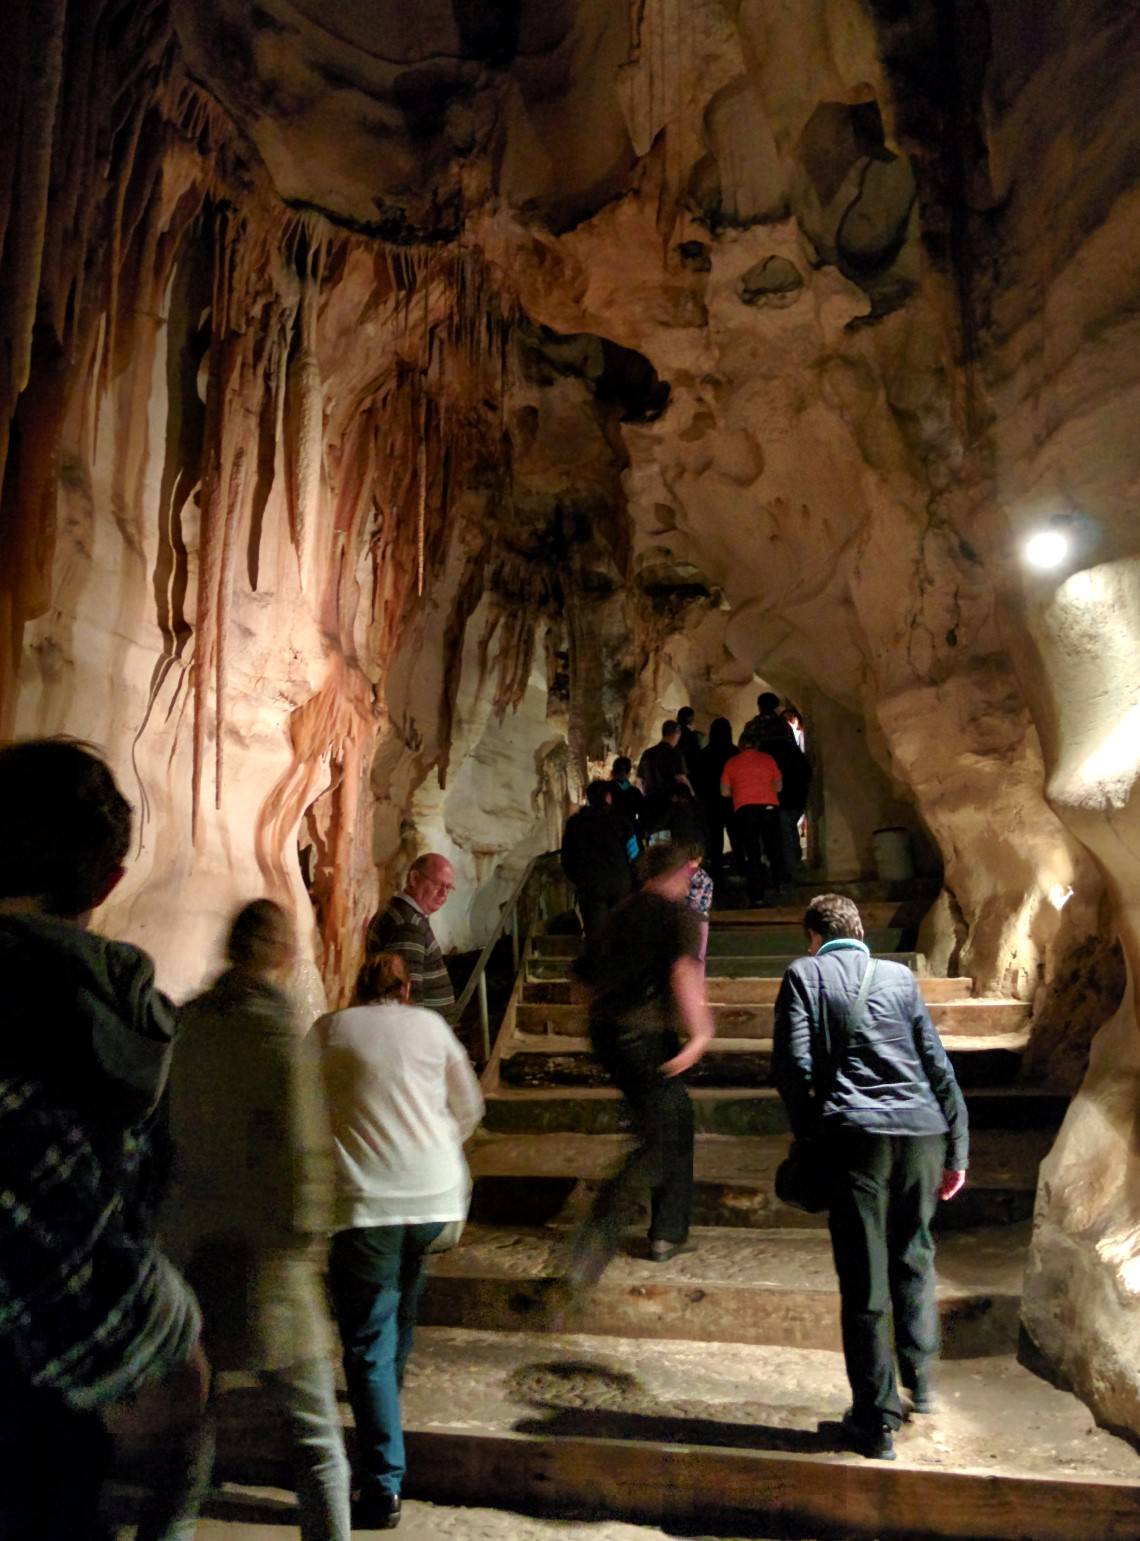 People inside a cave